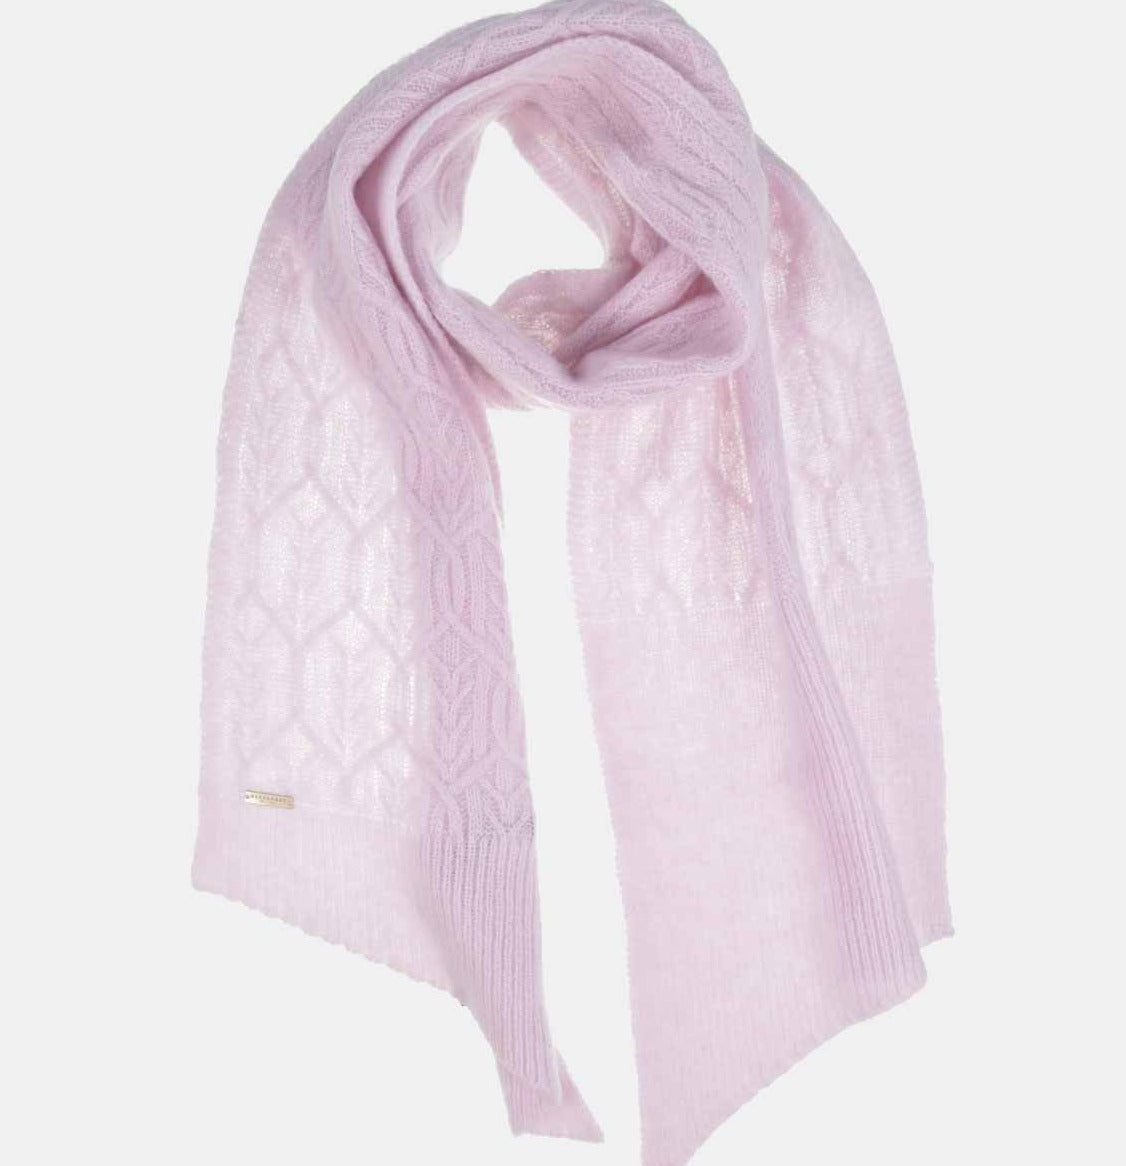 Seeberger Cable Knit Cashmere Silk Scarf in Lilac